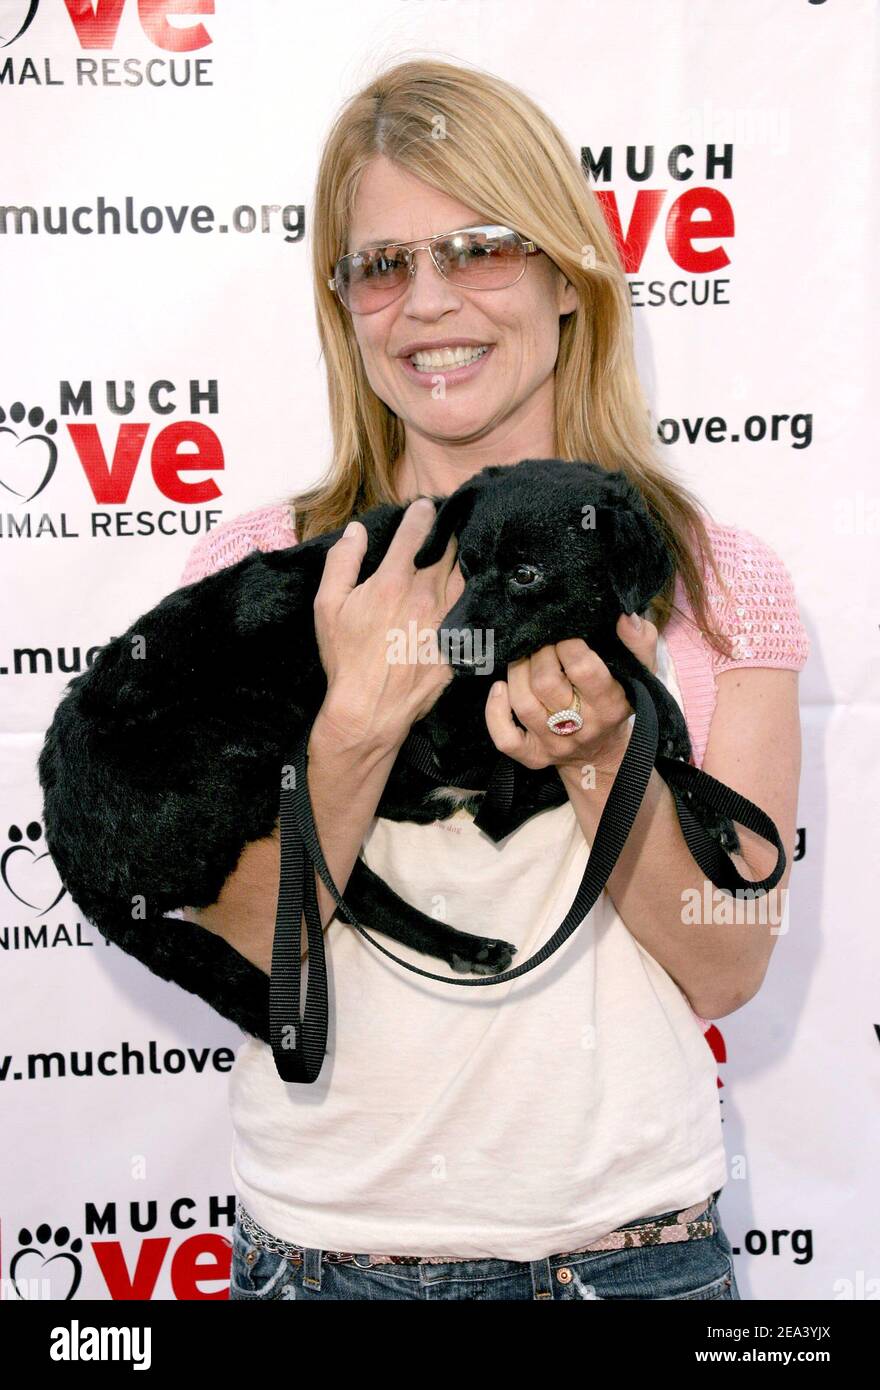 U.S. actress Linda Hamilton with orphan dog Paula attends the Much Love Animal Rescue Shop Til You Drool Benefit held at the 5th and Sunset Studios in West Los Angeles, CA, USA, on April 30, 2005. Photo by Amanda Parks/ABACA. Stock Photo